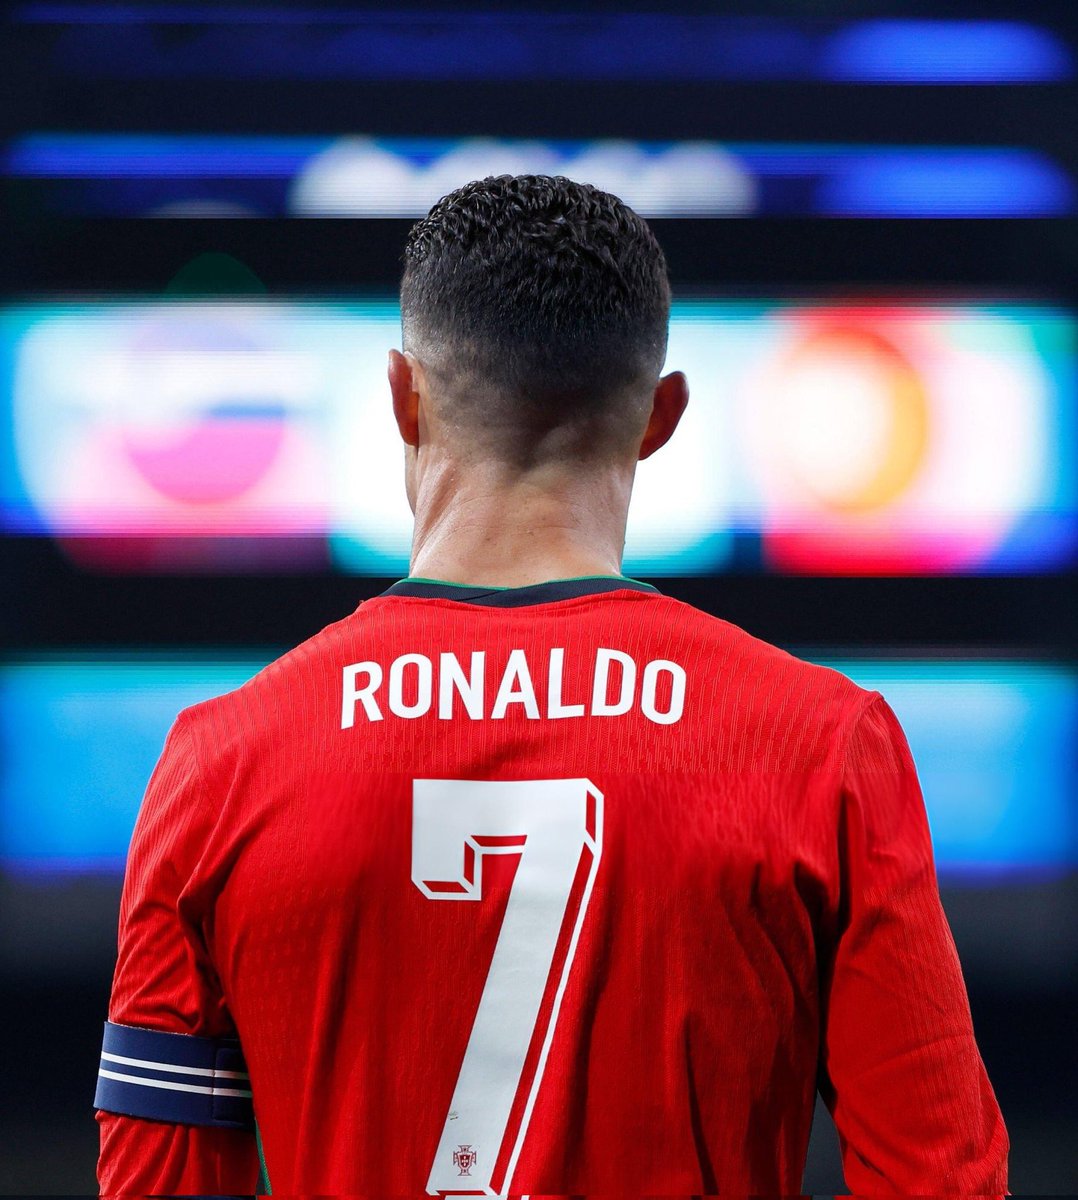 🇵🇹 Ronaldo played his first international friendly in 3 years last night, with Portugal losing 2-0 in Slovenia. ⛔️ After 11 consecutive victories, it was Portugal's first loss since the 2022 World Cup. 🔜 They will next play 3 warm-up friendlies in June (Finland, Croatia &…